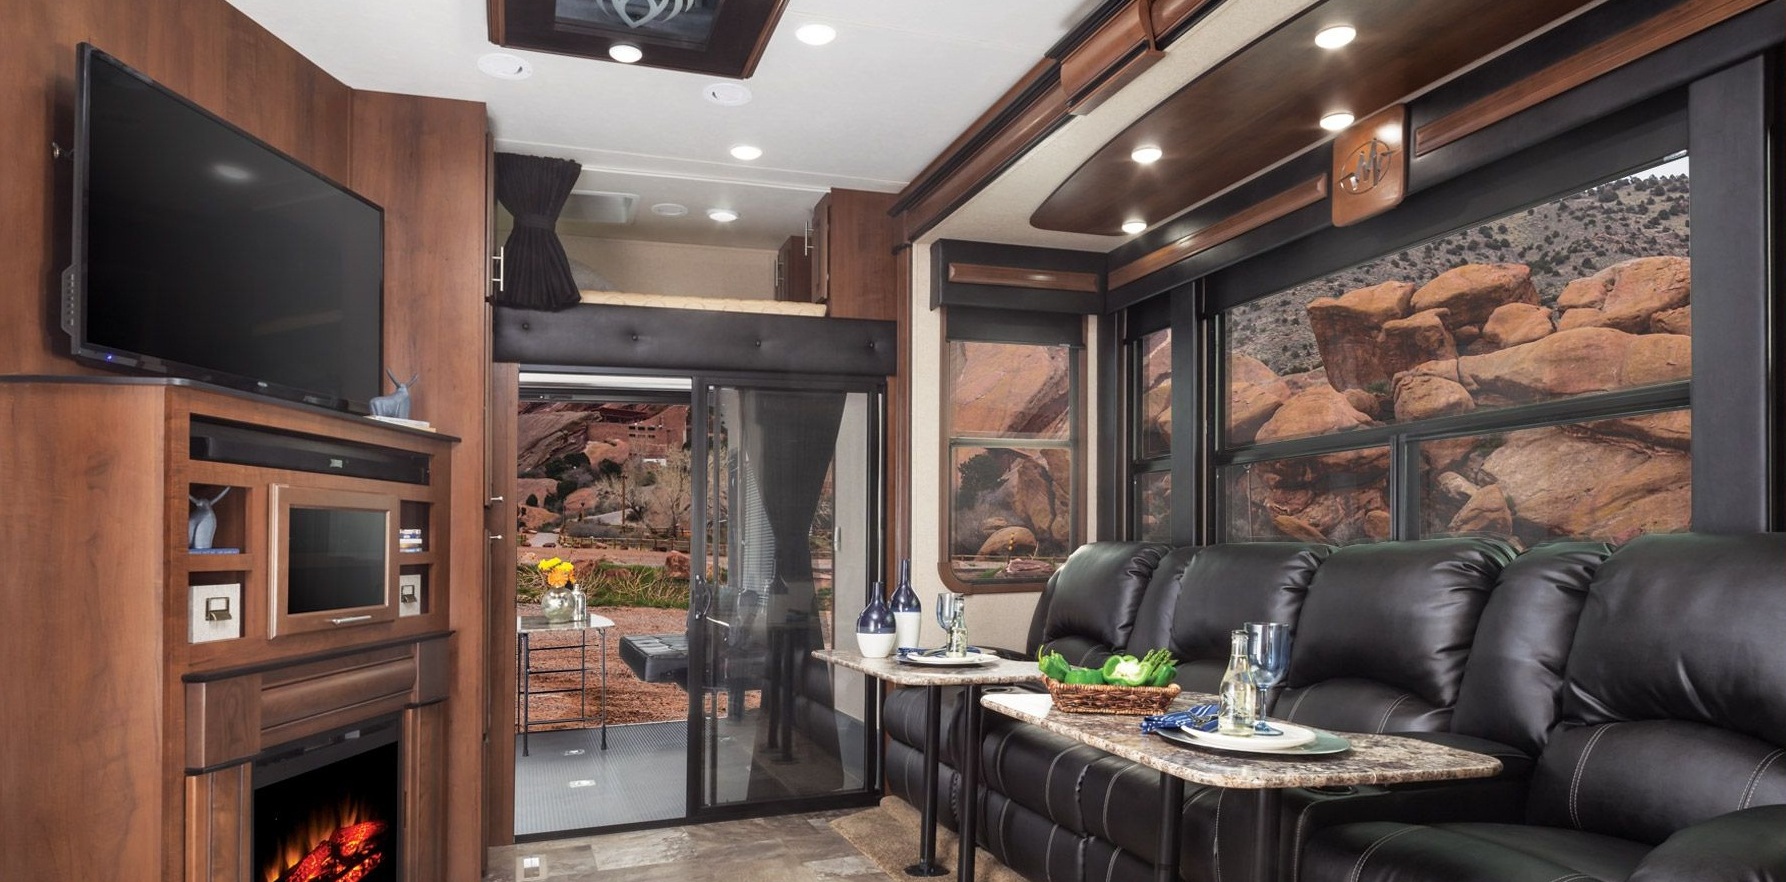 Fifth Wheel Campers With Front Living Rooms Roy Home Design